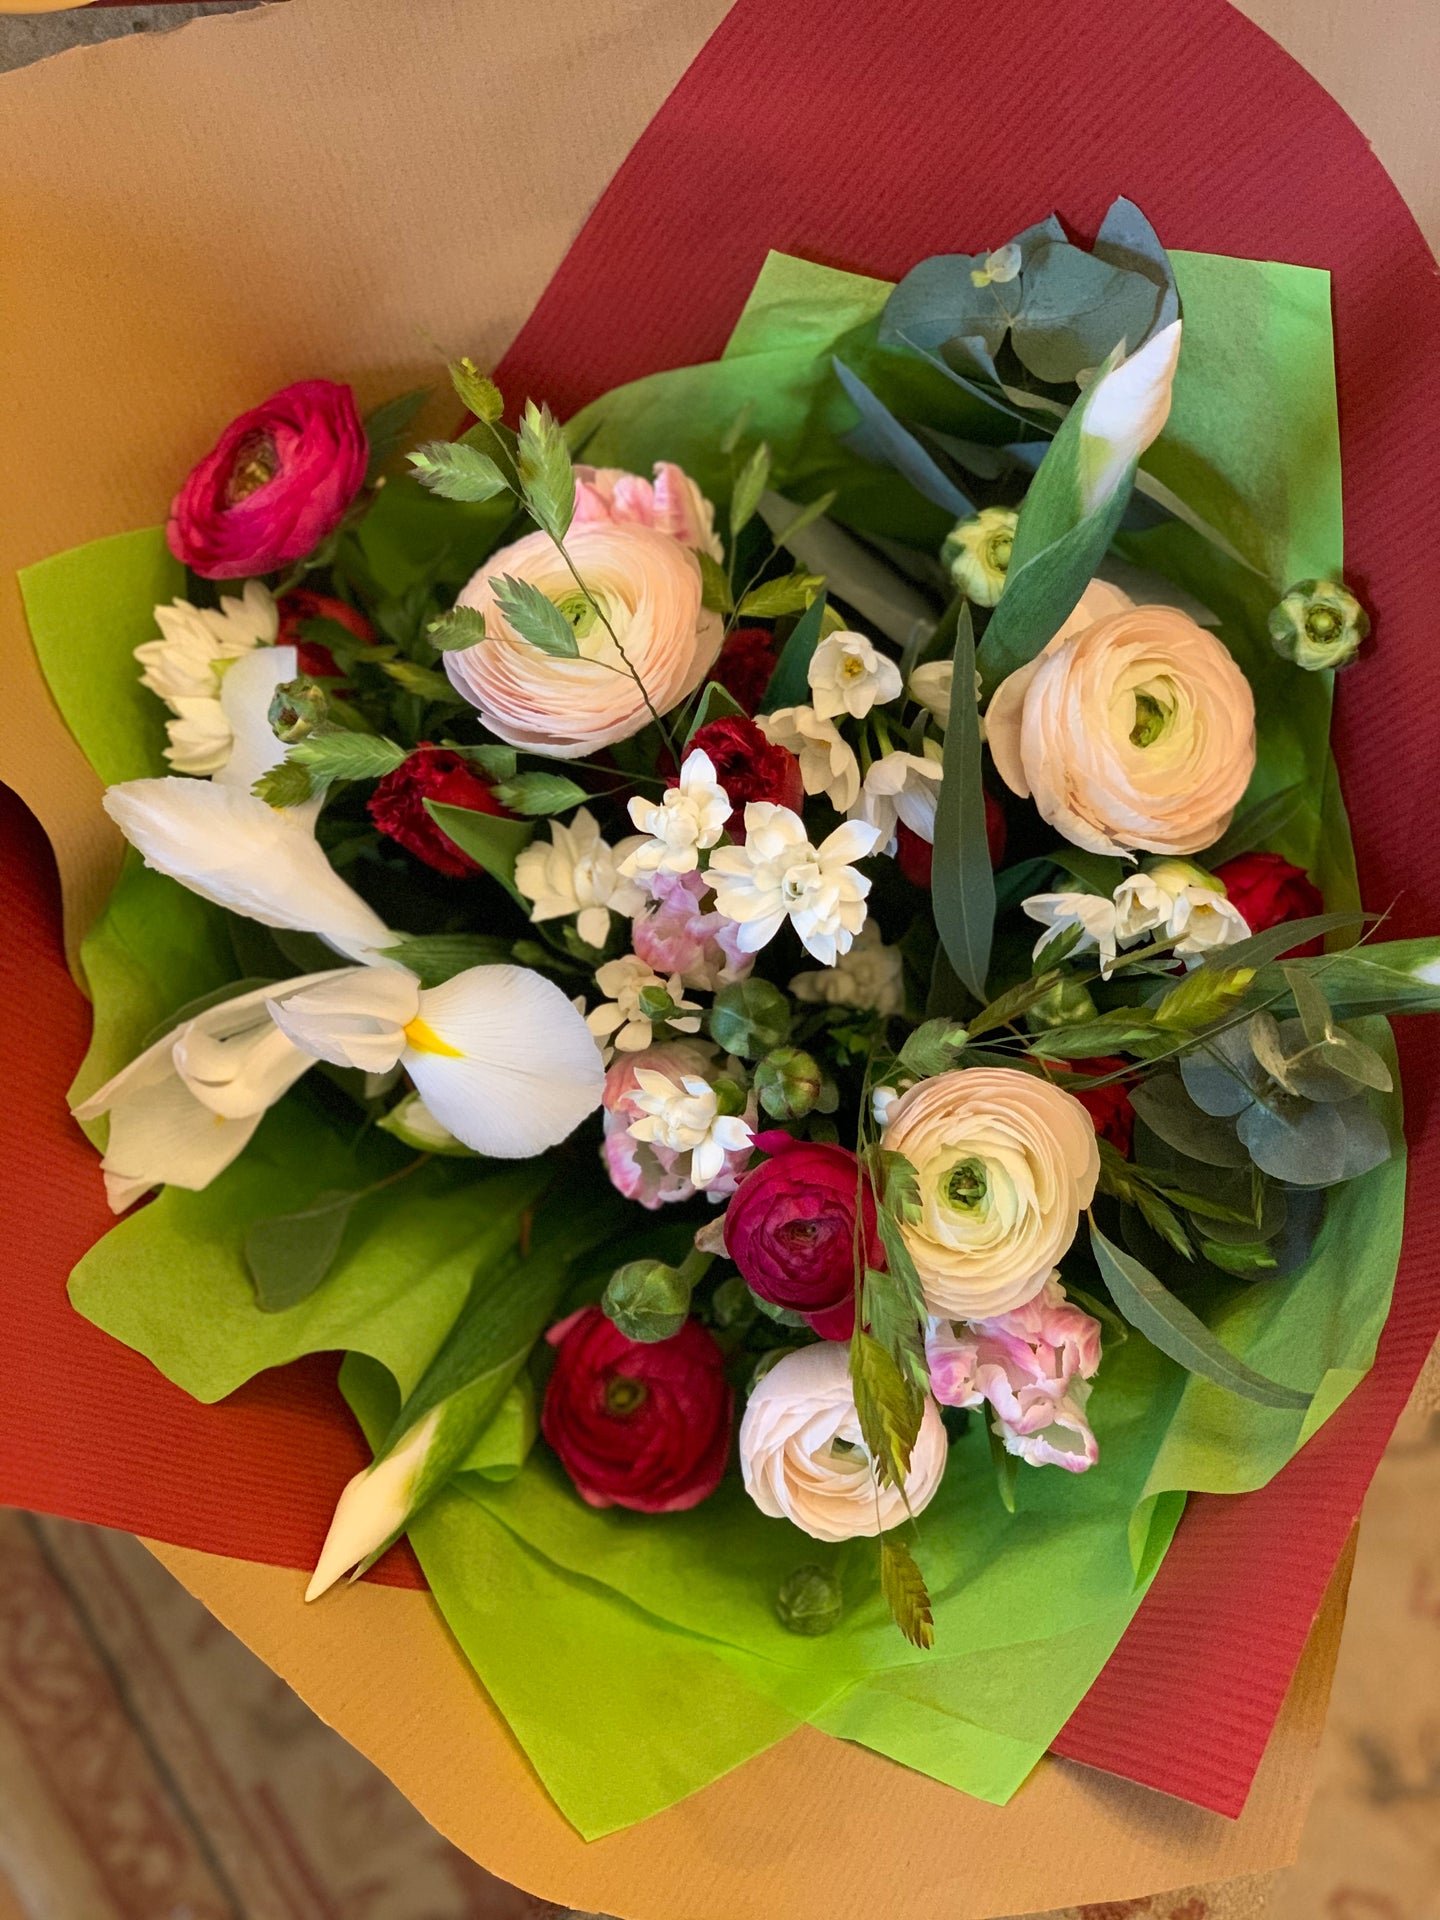 2022 Spring themed Valentine bouquet featuring red, pink and white blooms. Orders now closed.